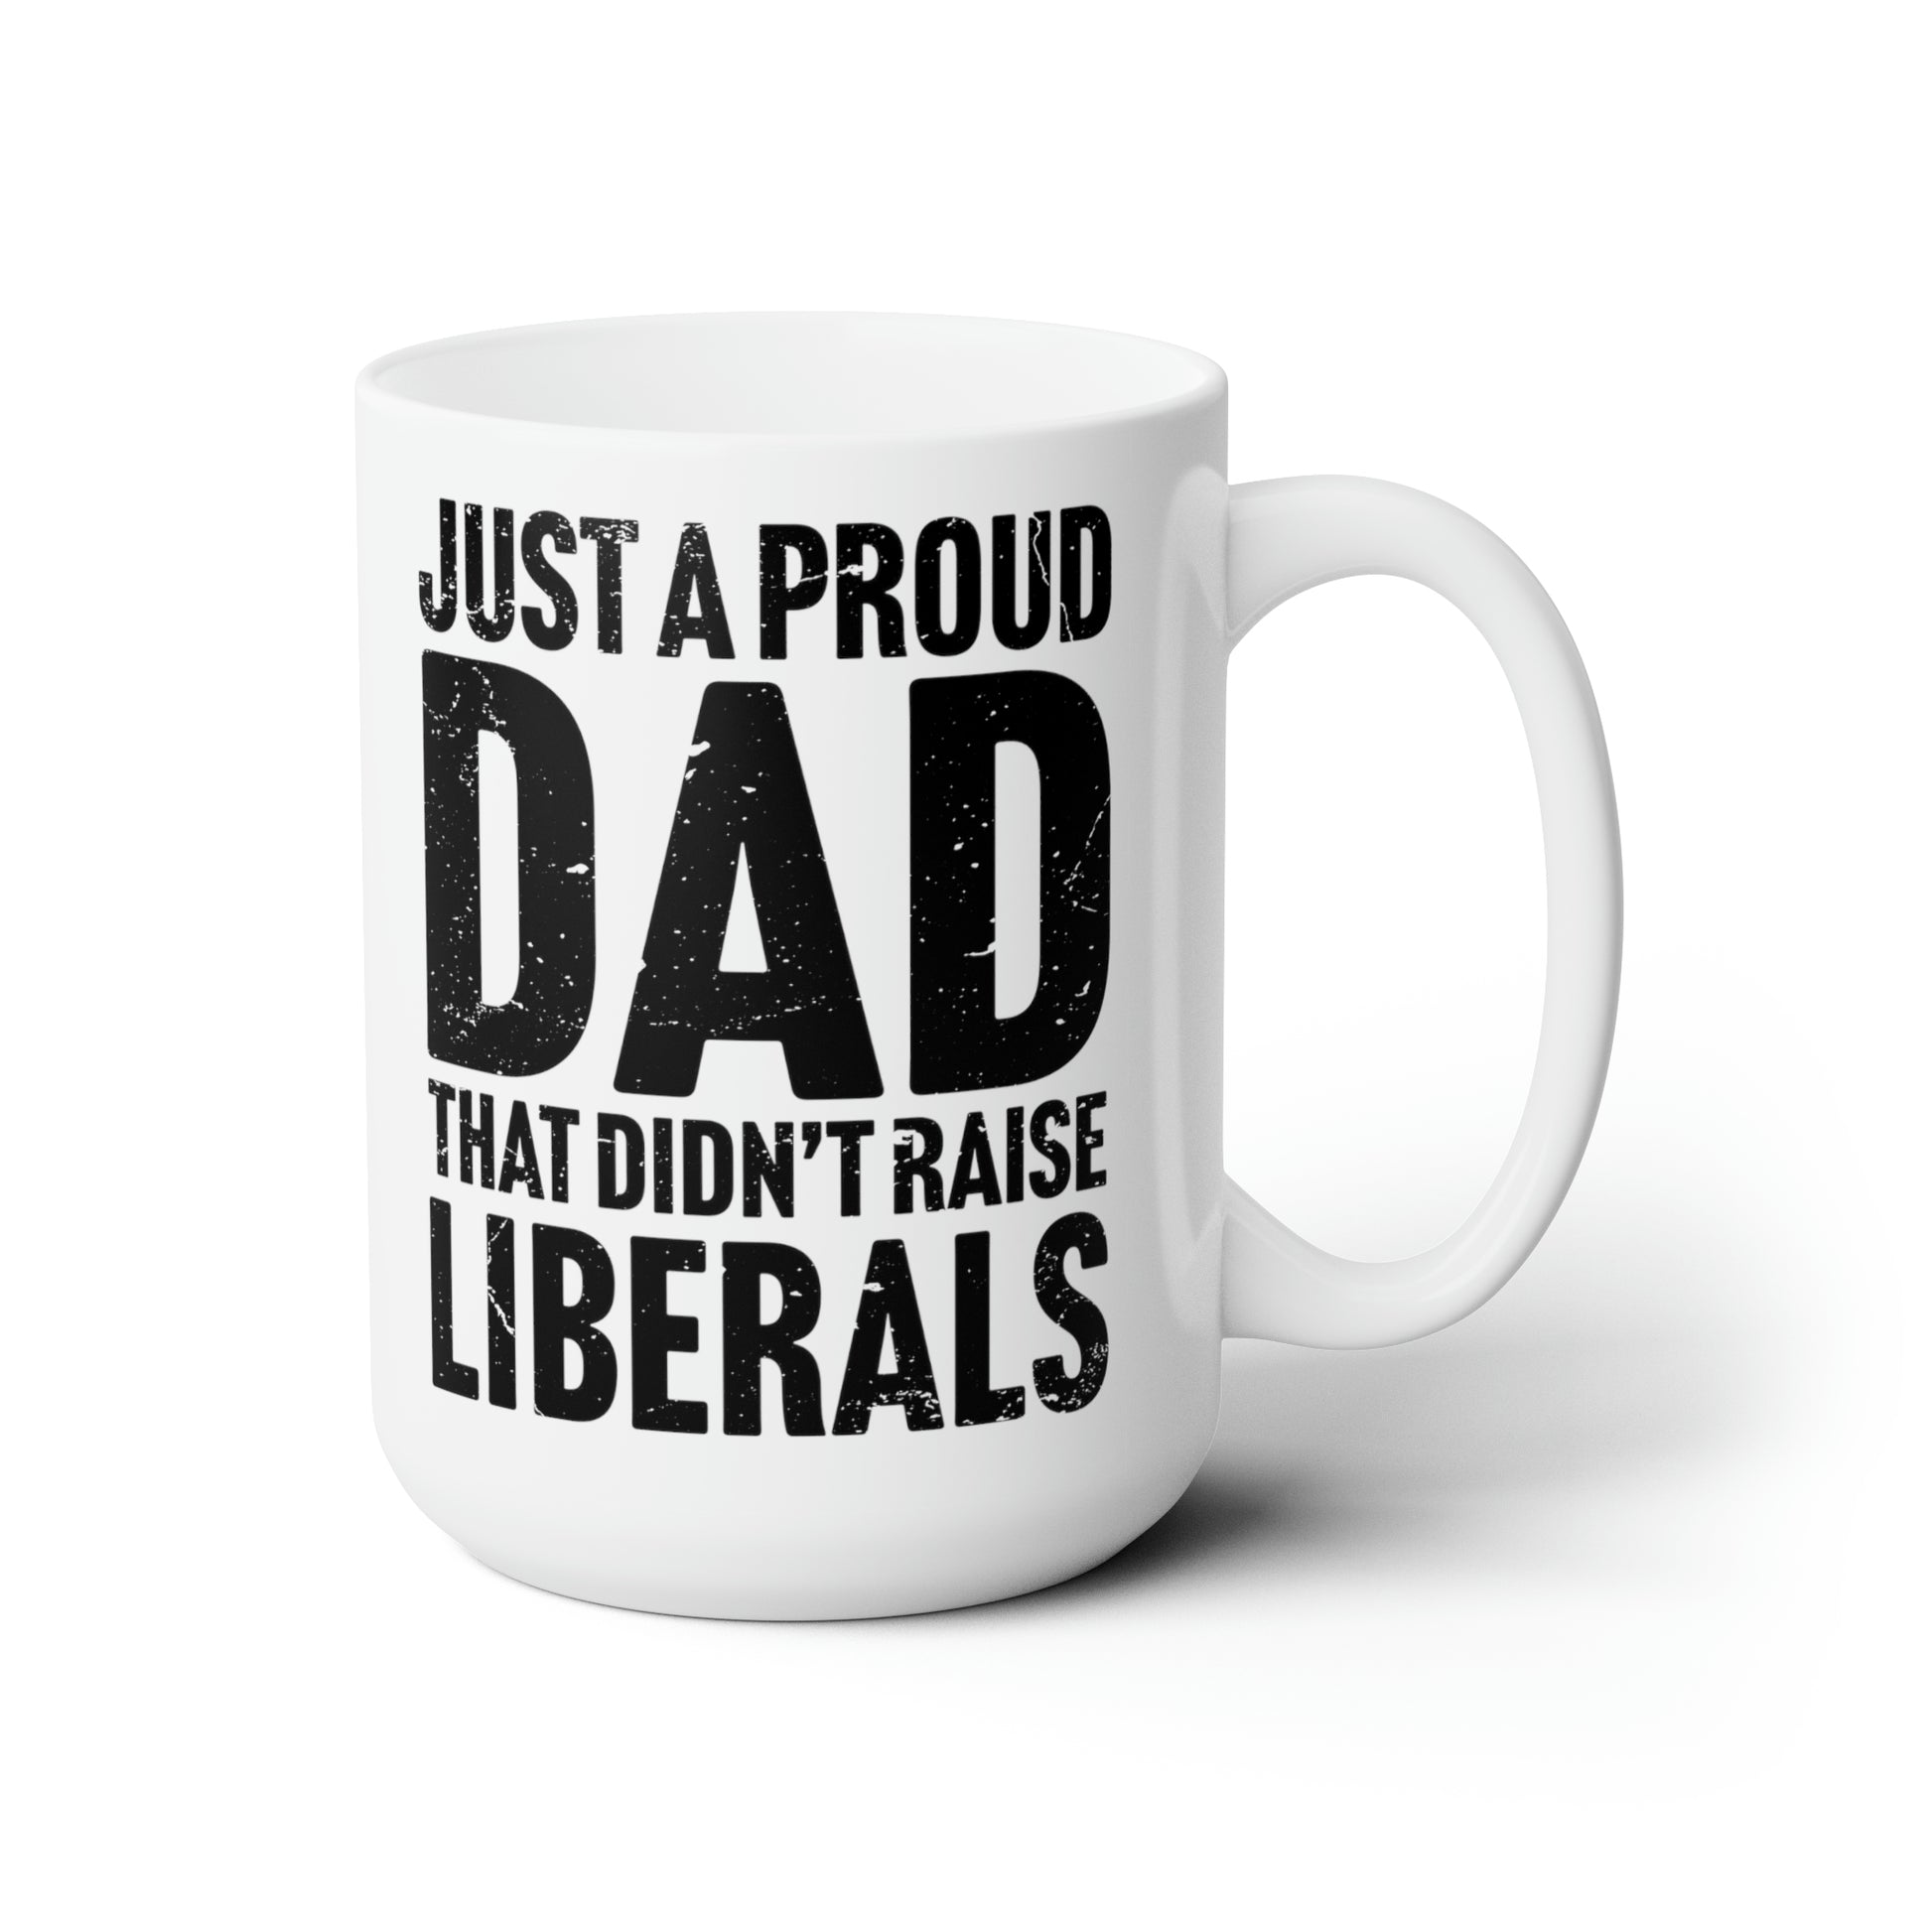 Funny Political Coffee Mug, Proud Conservative Dad, Anti-Liberal Humor, Gag Gift for Republicans, Father's Day Novelty Cup - News For Reasonable People